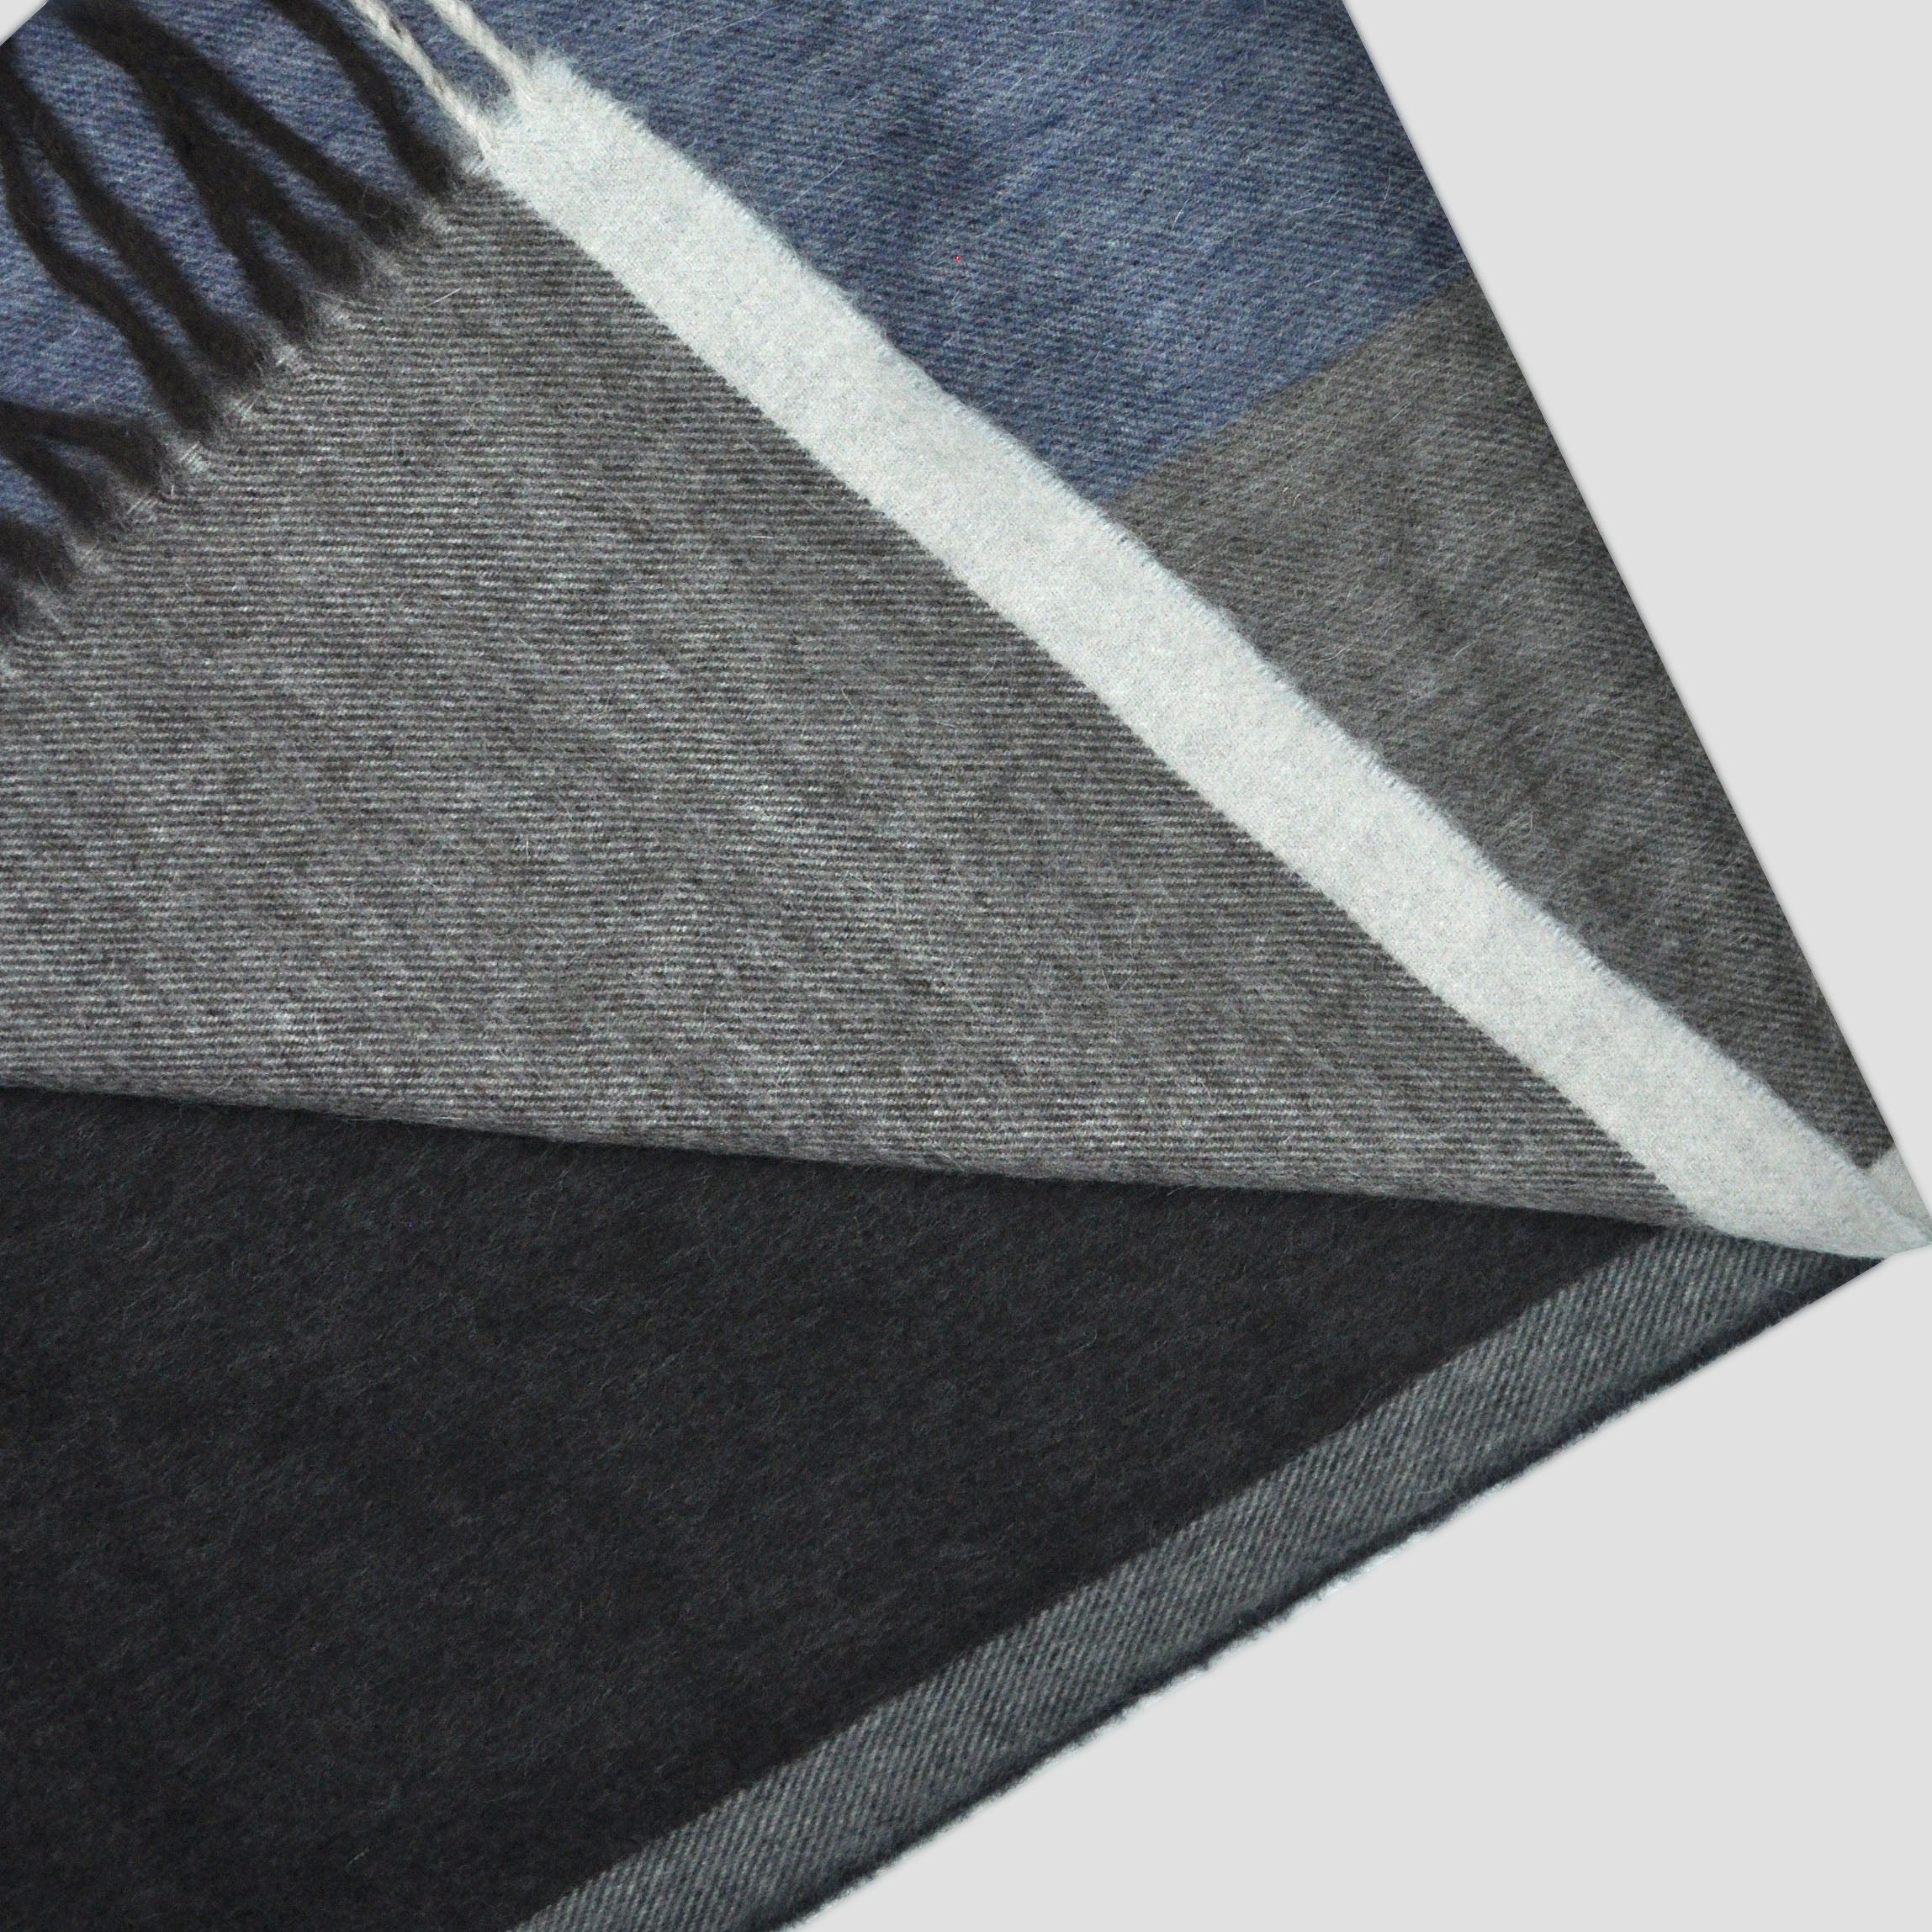 Panels of Colour Winter Scarf in Brown, Grey, Blue & White